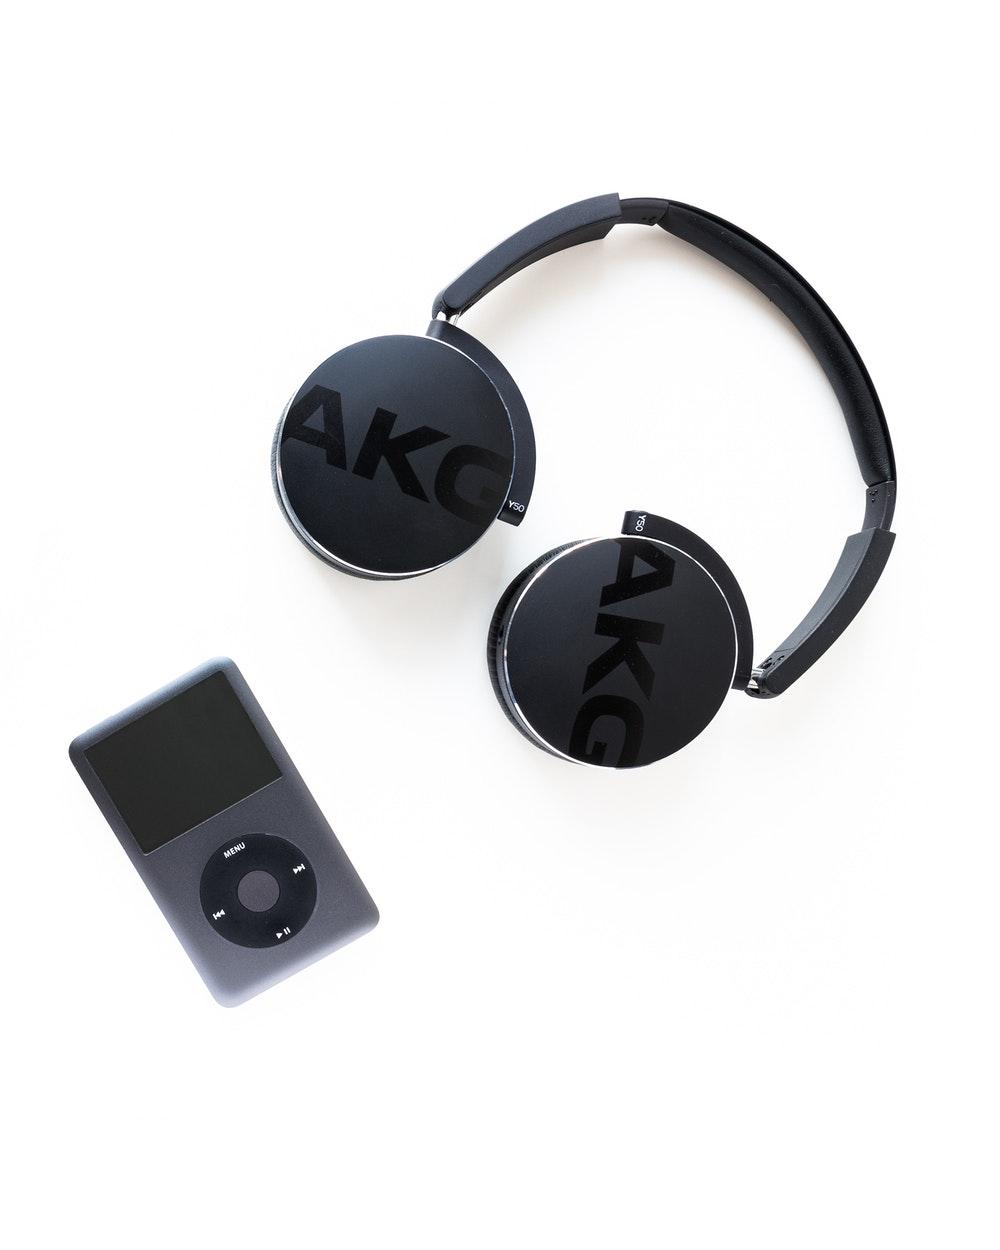 Akg Picture. Download Free Image